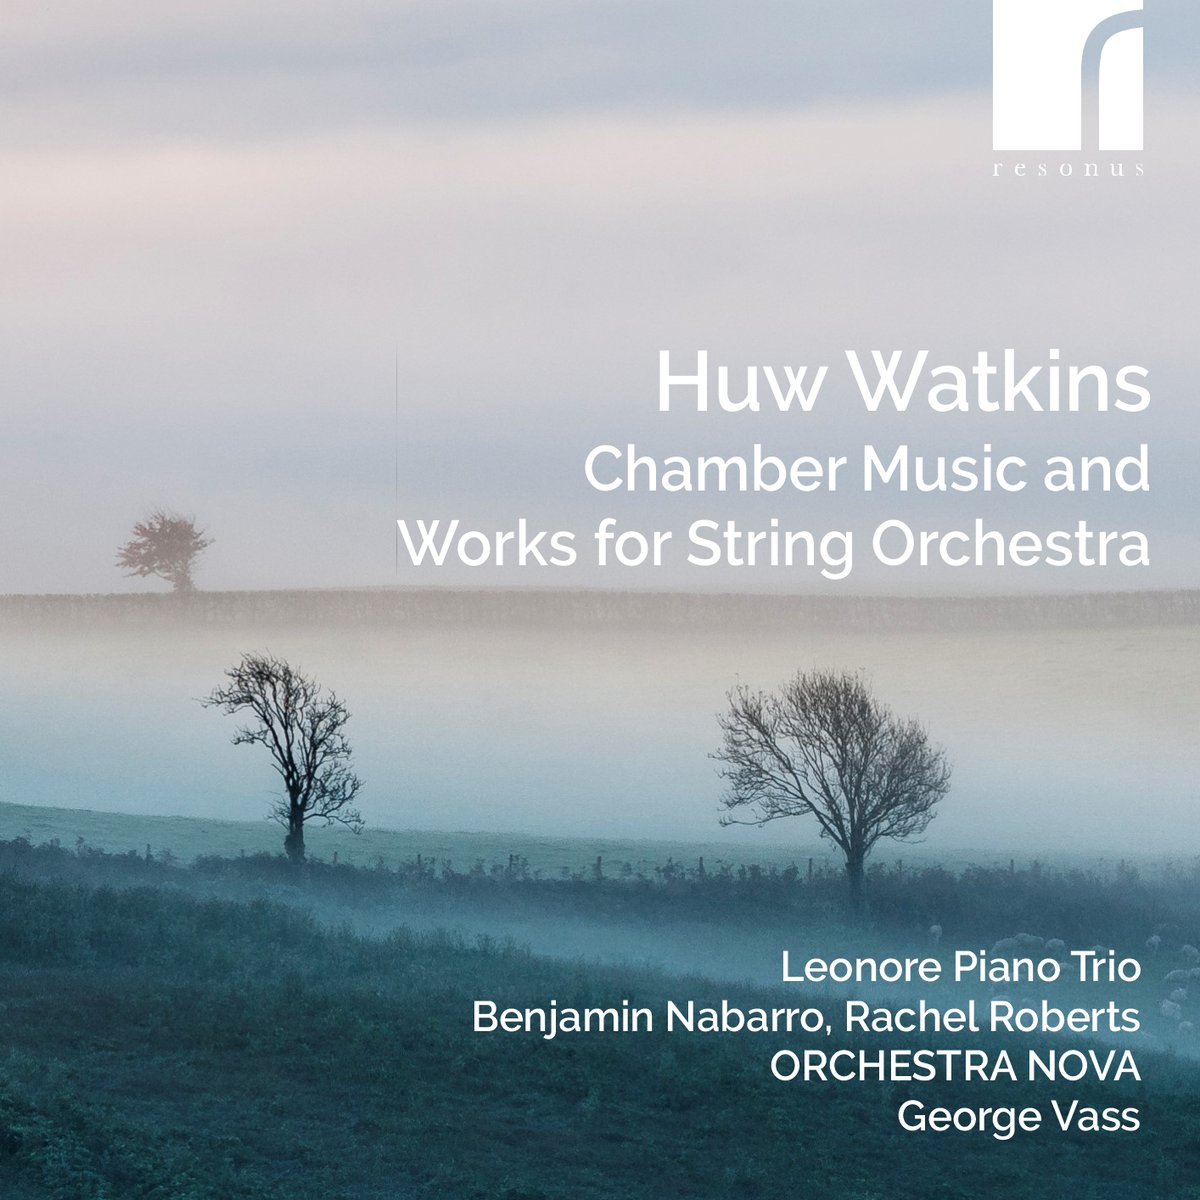 Check out this new single from the forthcoming album of music by Huw Watkins @WatkinsHuw. This is the Lento from the Piano Trio No. 1 with the Leonore Piano Trio @LeonoreInfo. Listen now on @AppleMusic #appleclassicalapp or wherever you get your music👉orcd.co/4dp5kx